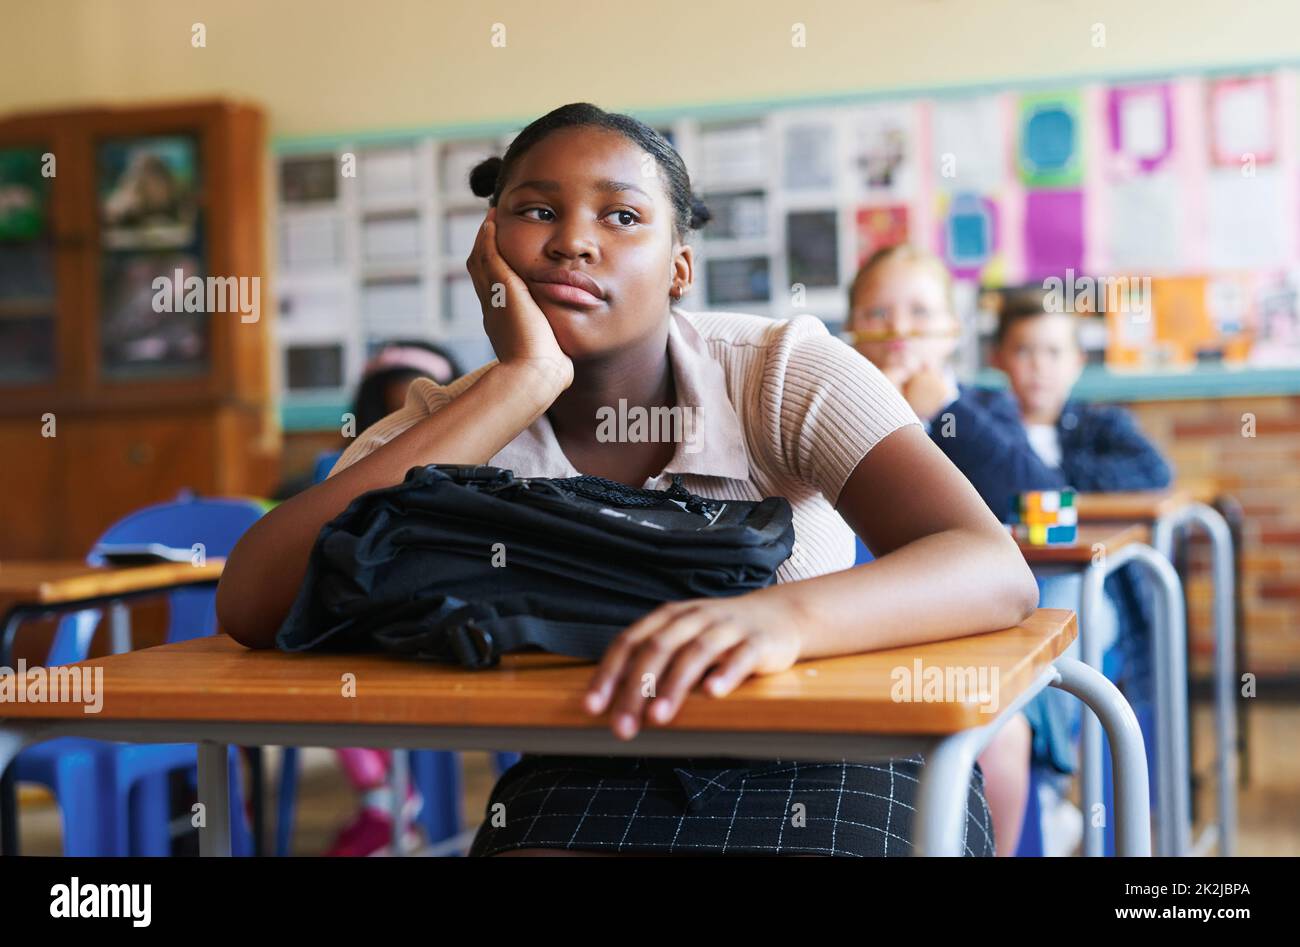 Argh, its going to be a long day. Shot of a young girl sitting in her classroom at school and feeling bored. Stock Photo